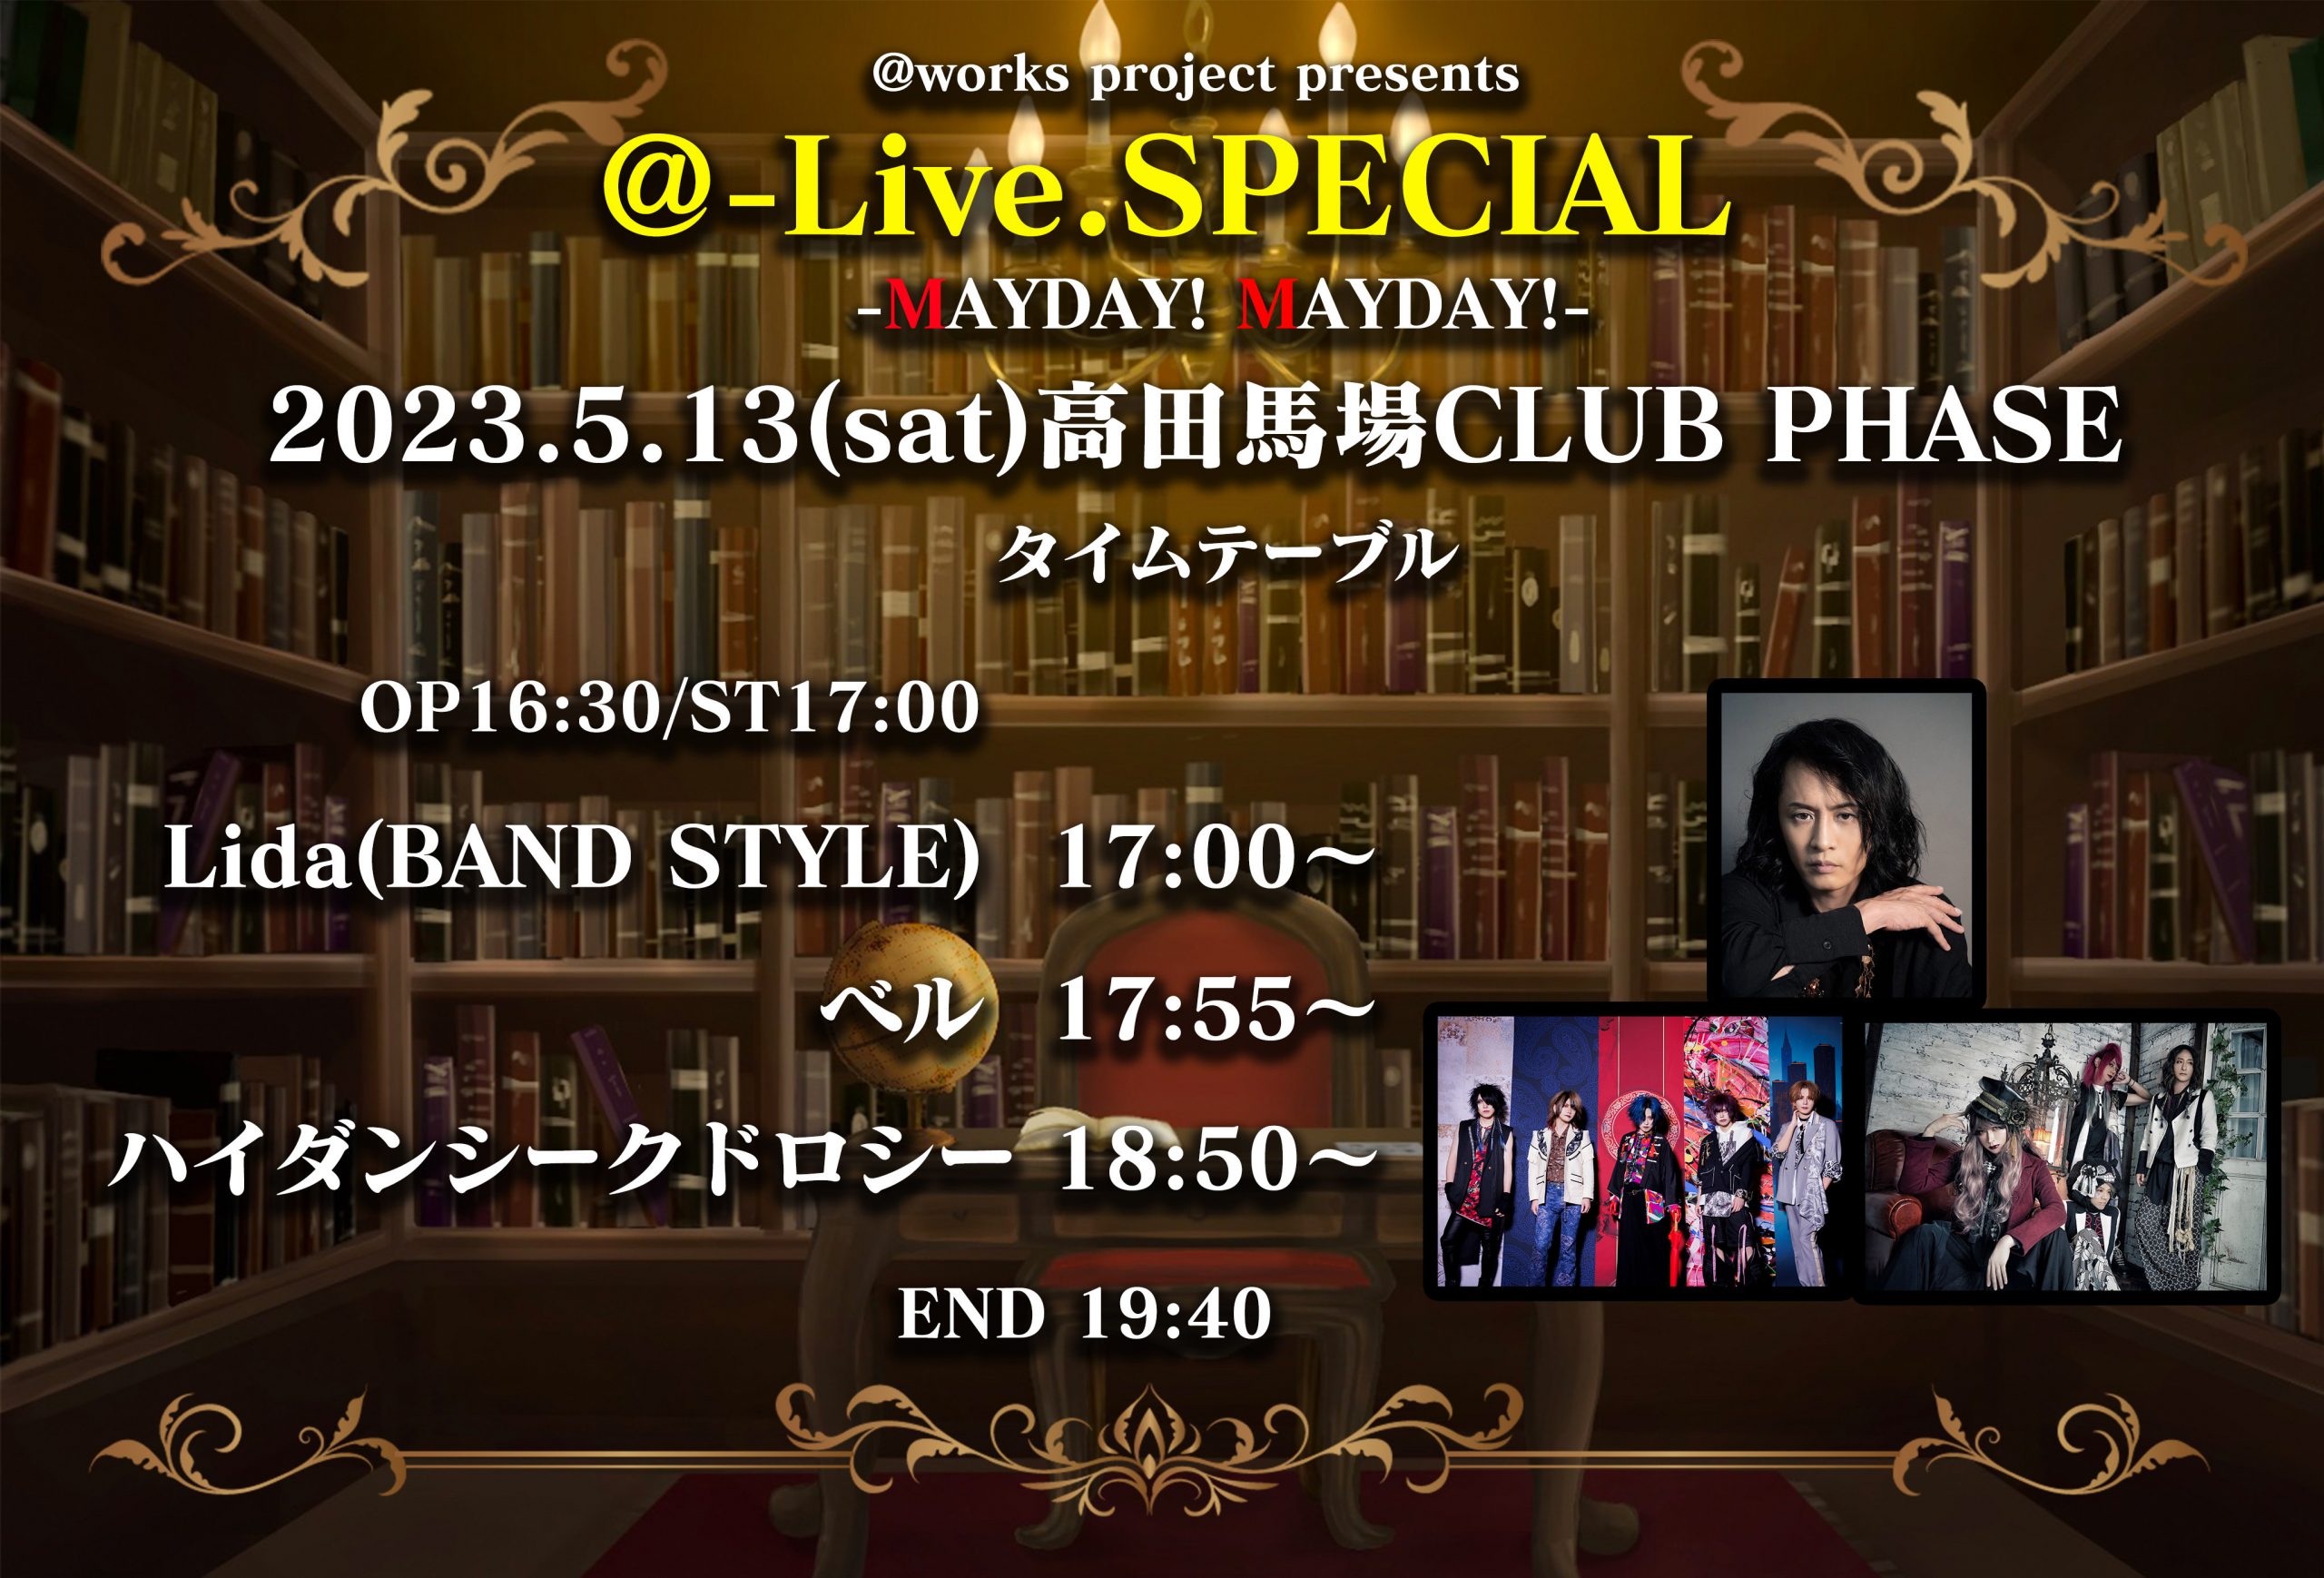 ＠-Live.SPECIAL -MAYDAY! MAYDAY!-